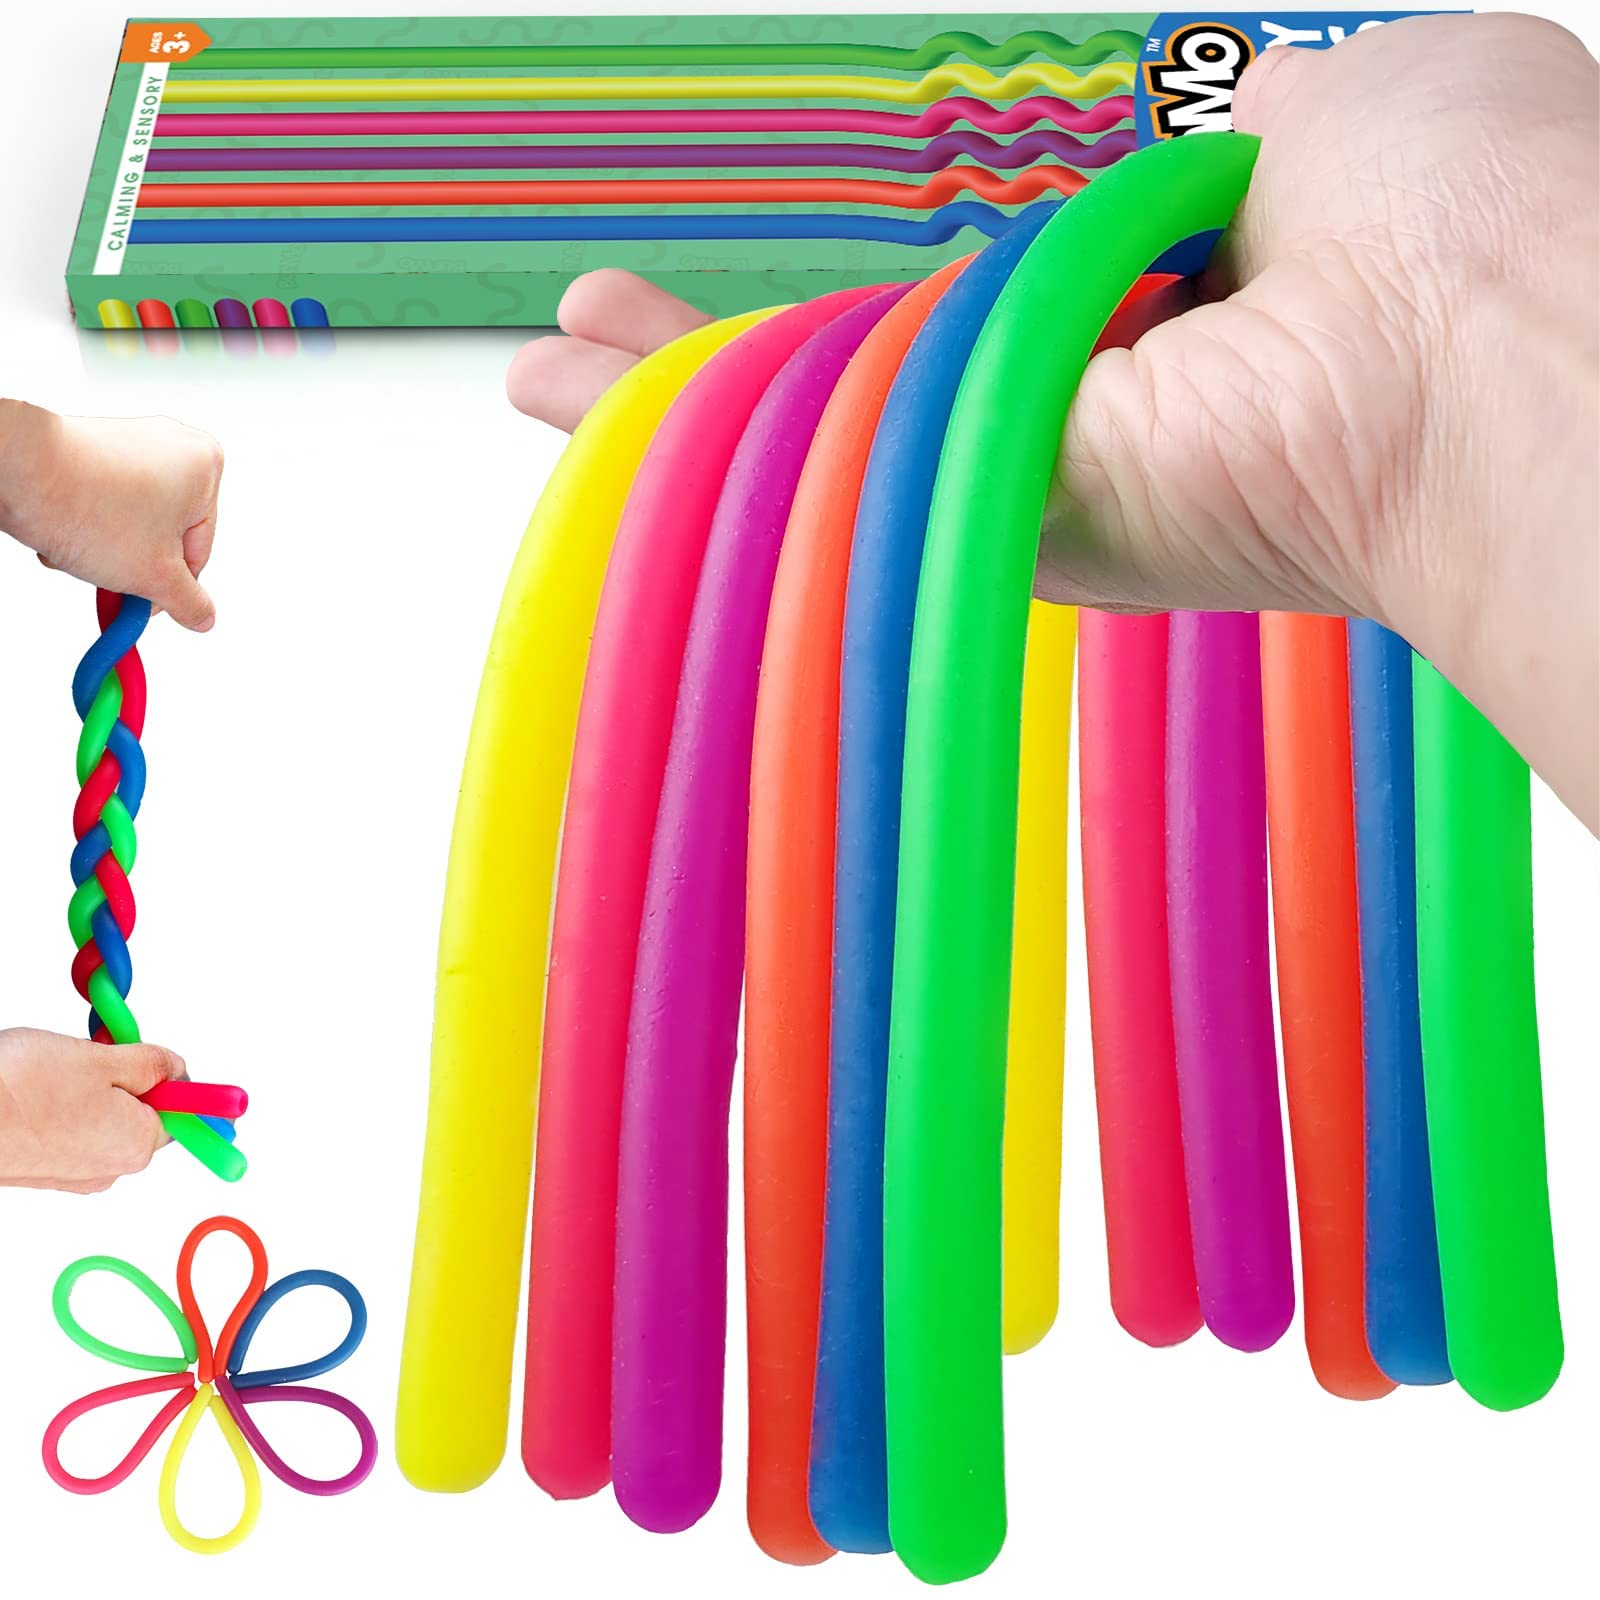 BUNMO Stretchy Strings Sensory Toys 6pk | Perfect Fidget Toy for Anxiety & Stress | Super Calming Fidget Toys | Fun & Engaging Autism Toys | Focus & Stimulation | Hours of Fun for Kids